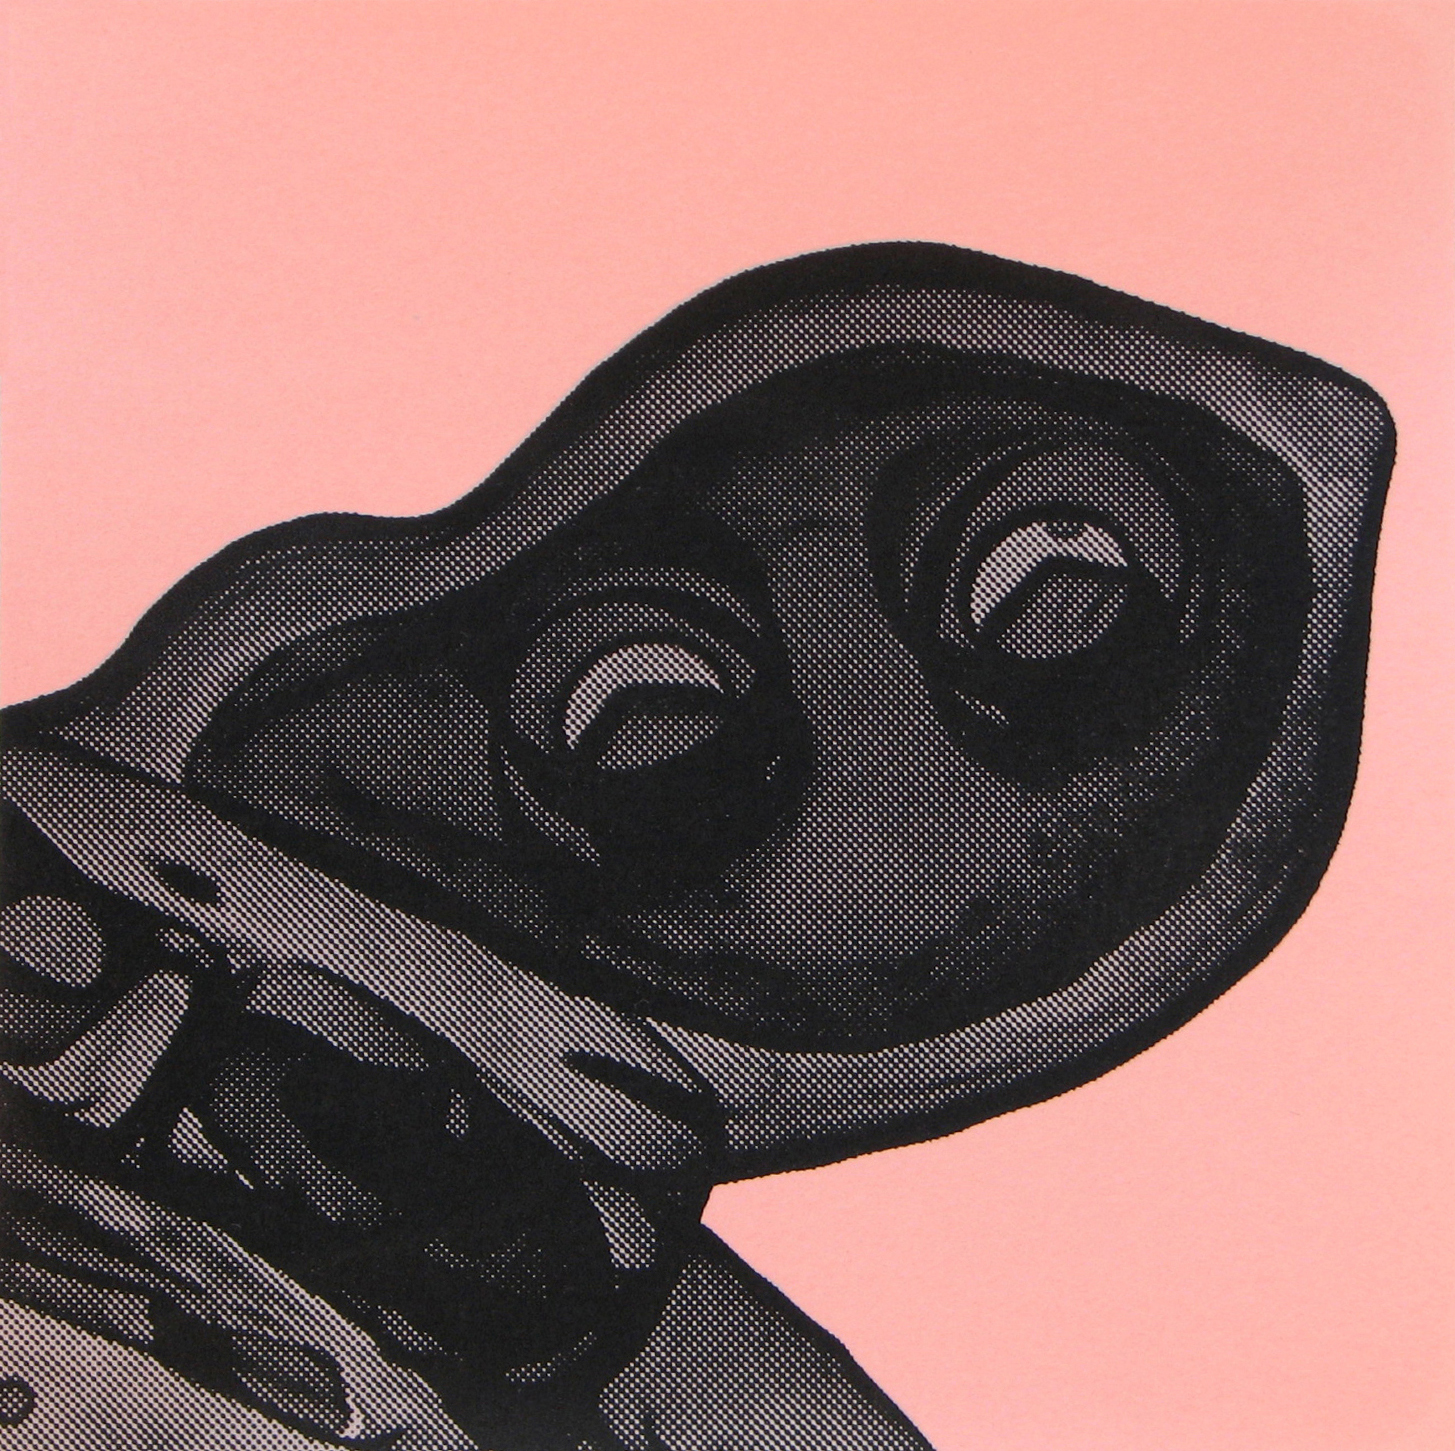 Copy of Erica Seccombe, head (pink) 2007. 